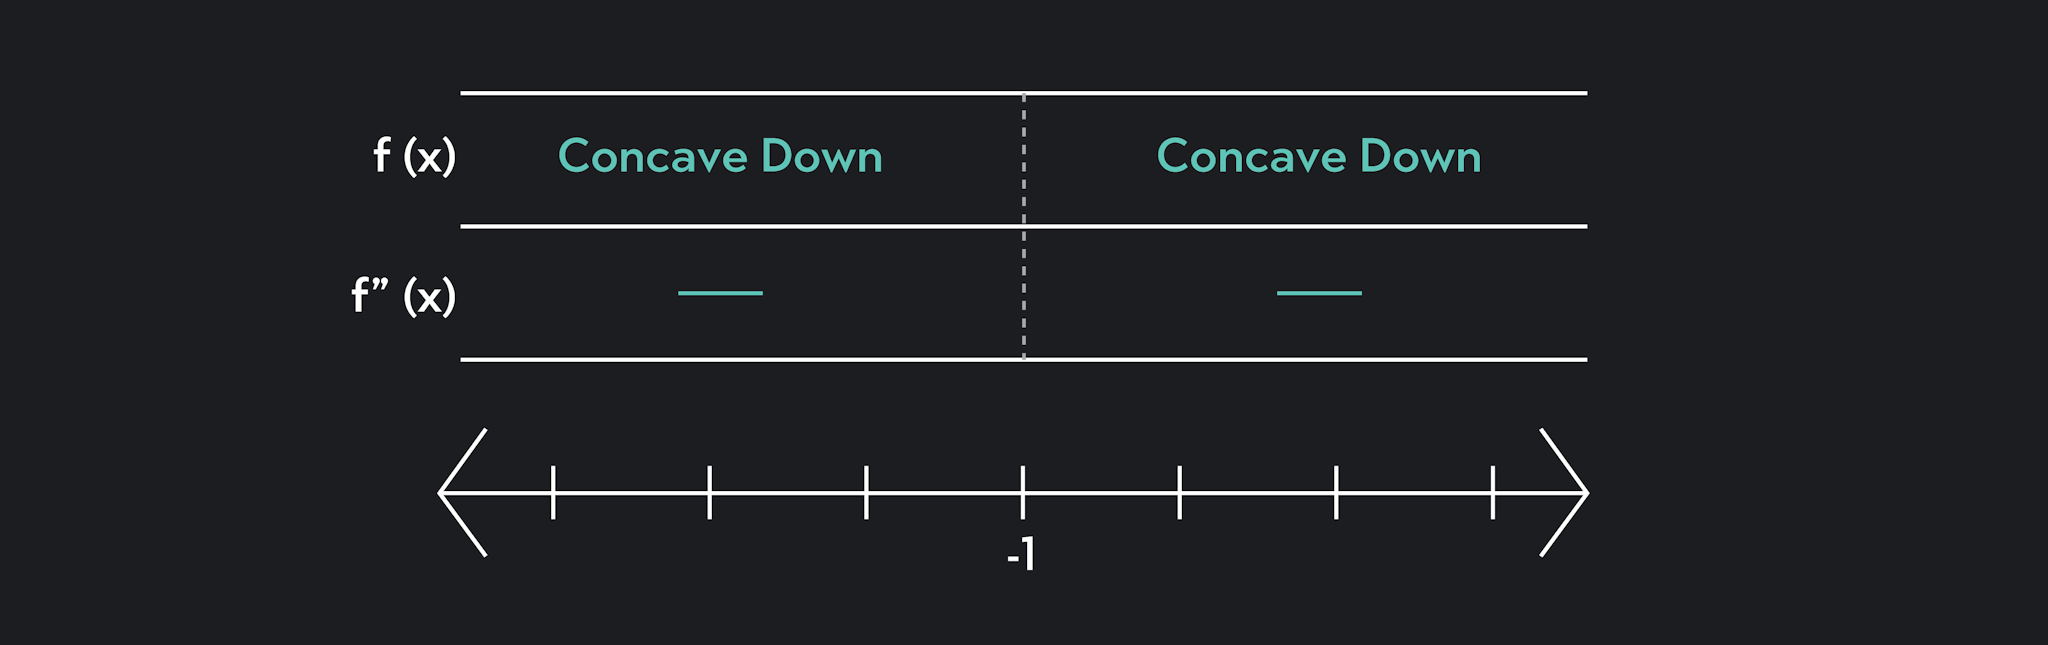 Number line showing concave down, concave up, and -1 = inflection point